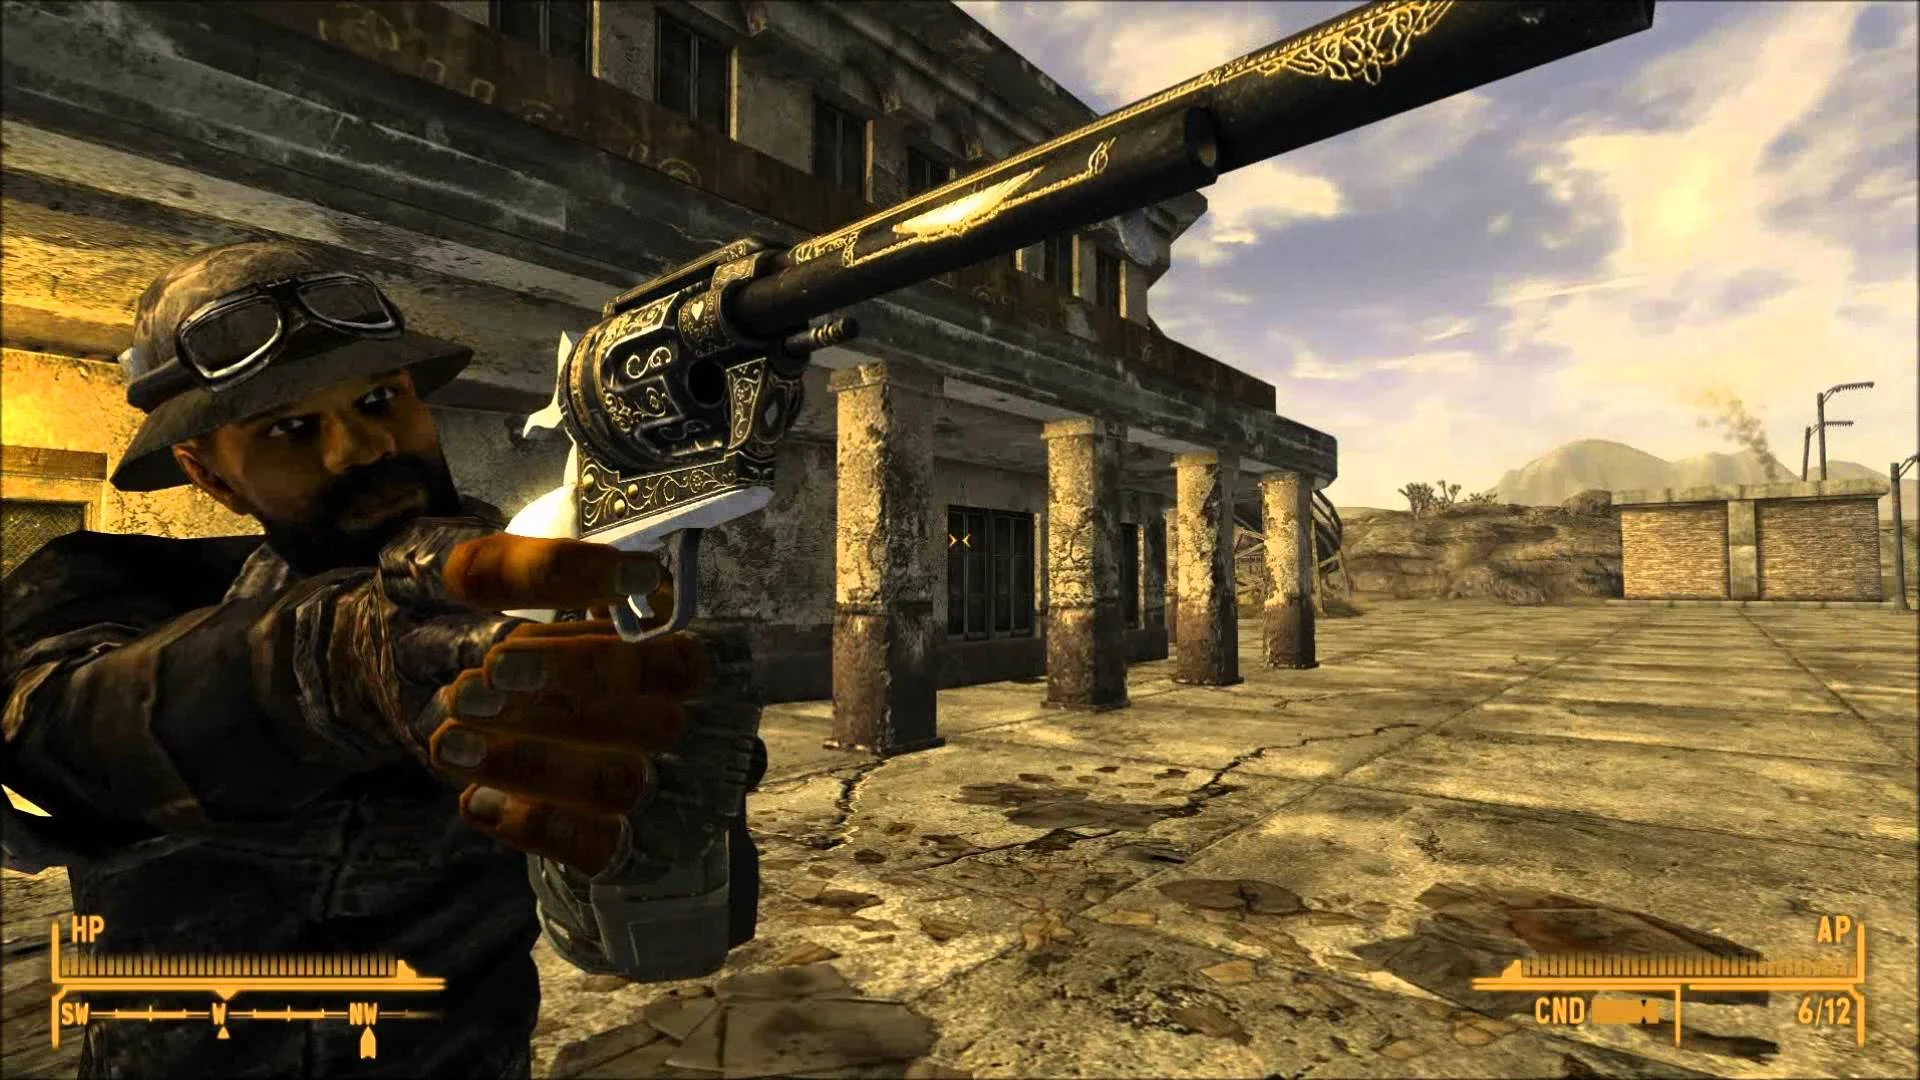 Gallery of Fallout New Vegas 357 Revolver.